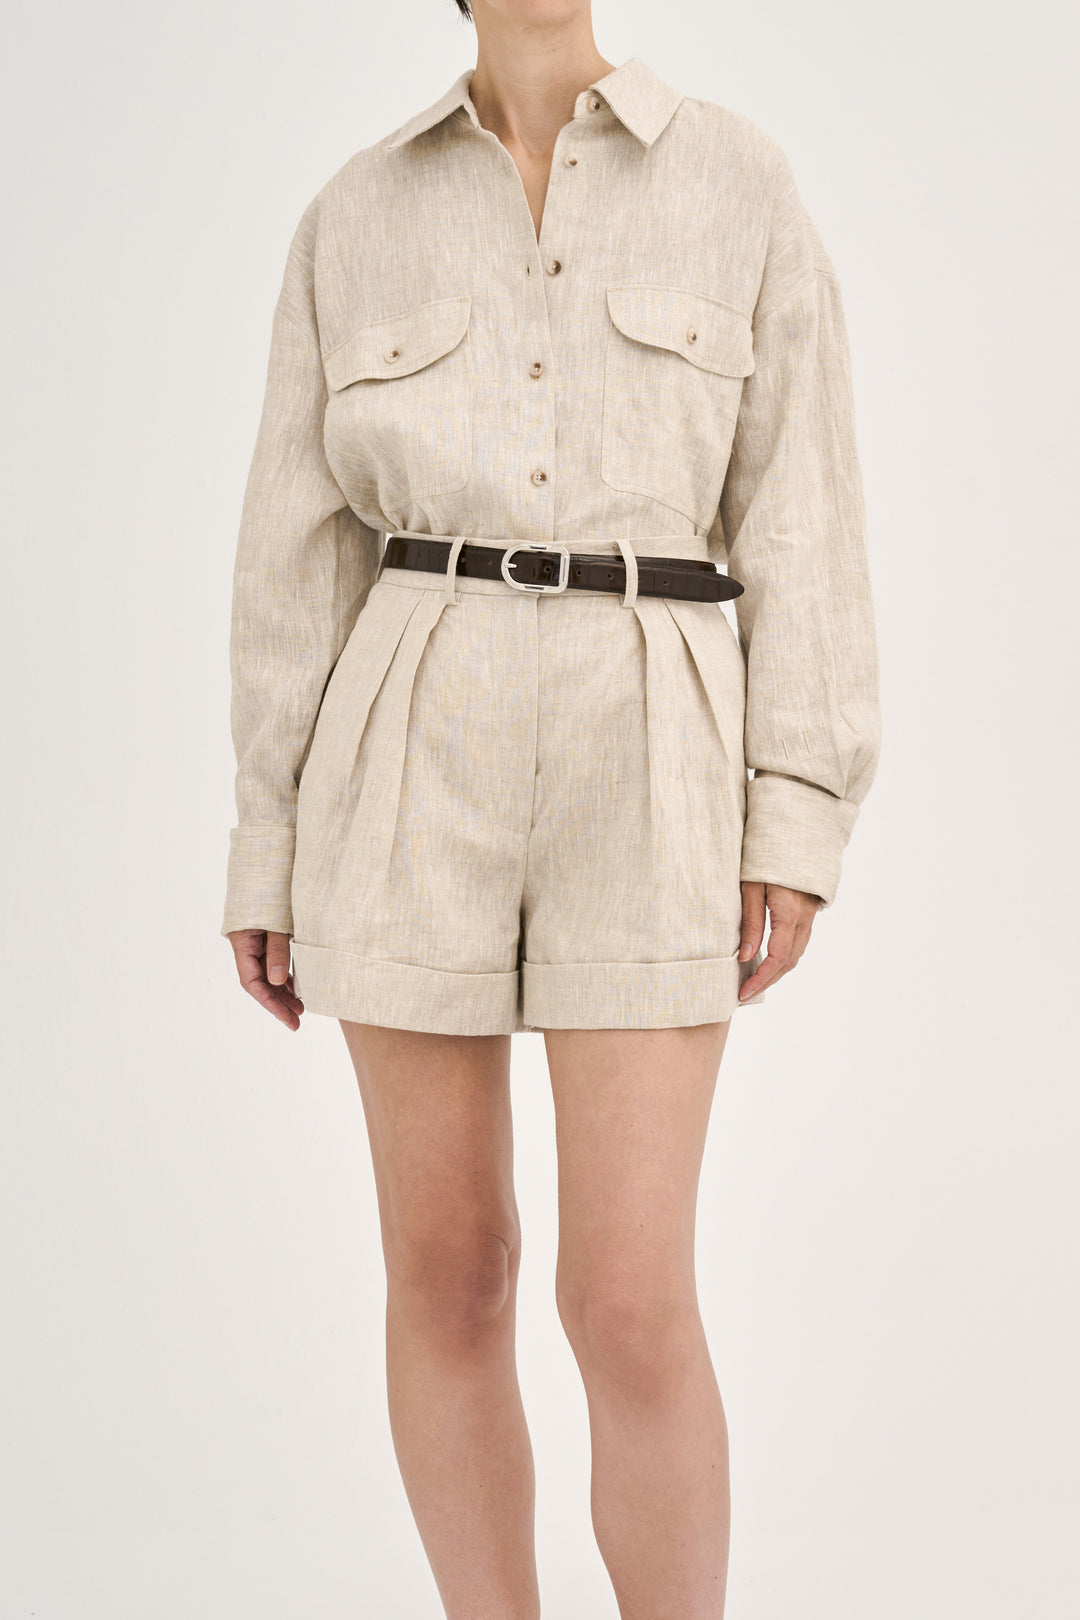 Model wearing Déhanche Mija Croco brown leather belt with crocodile texture and silver buckle, styled with beige linen shorts and matching shirt.